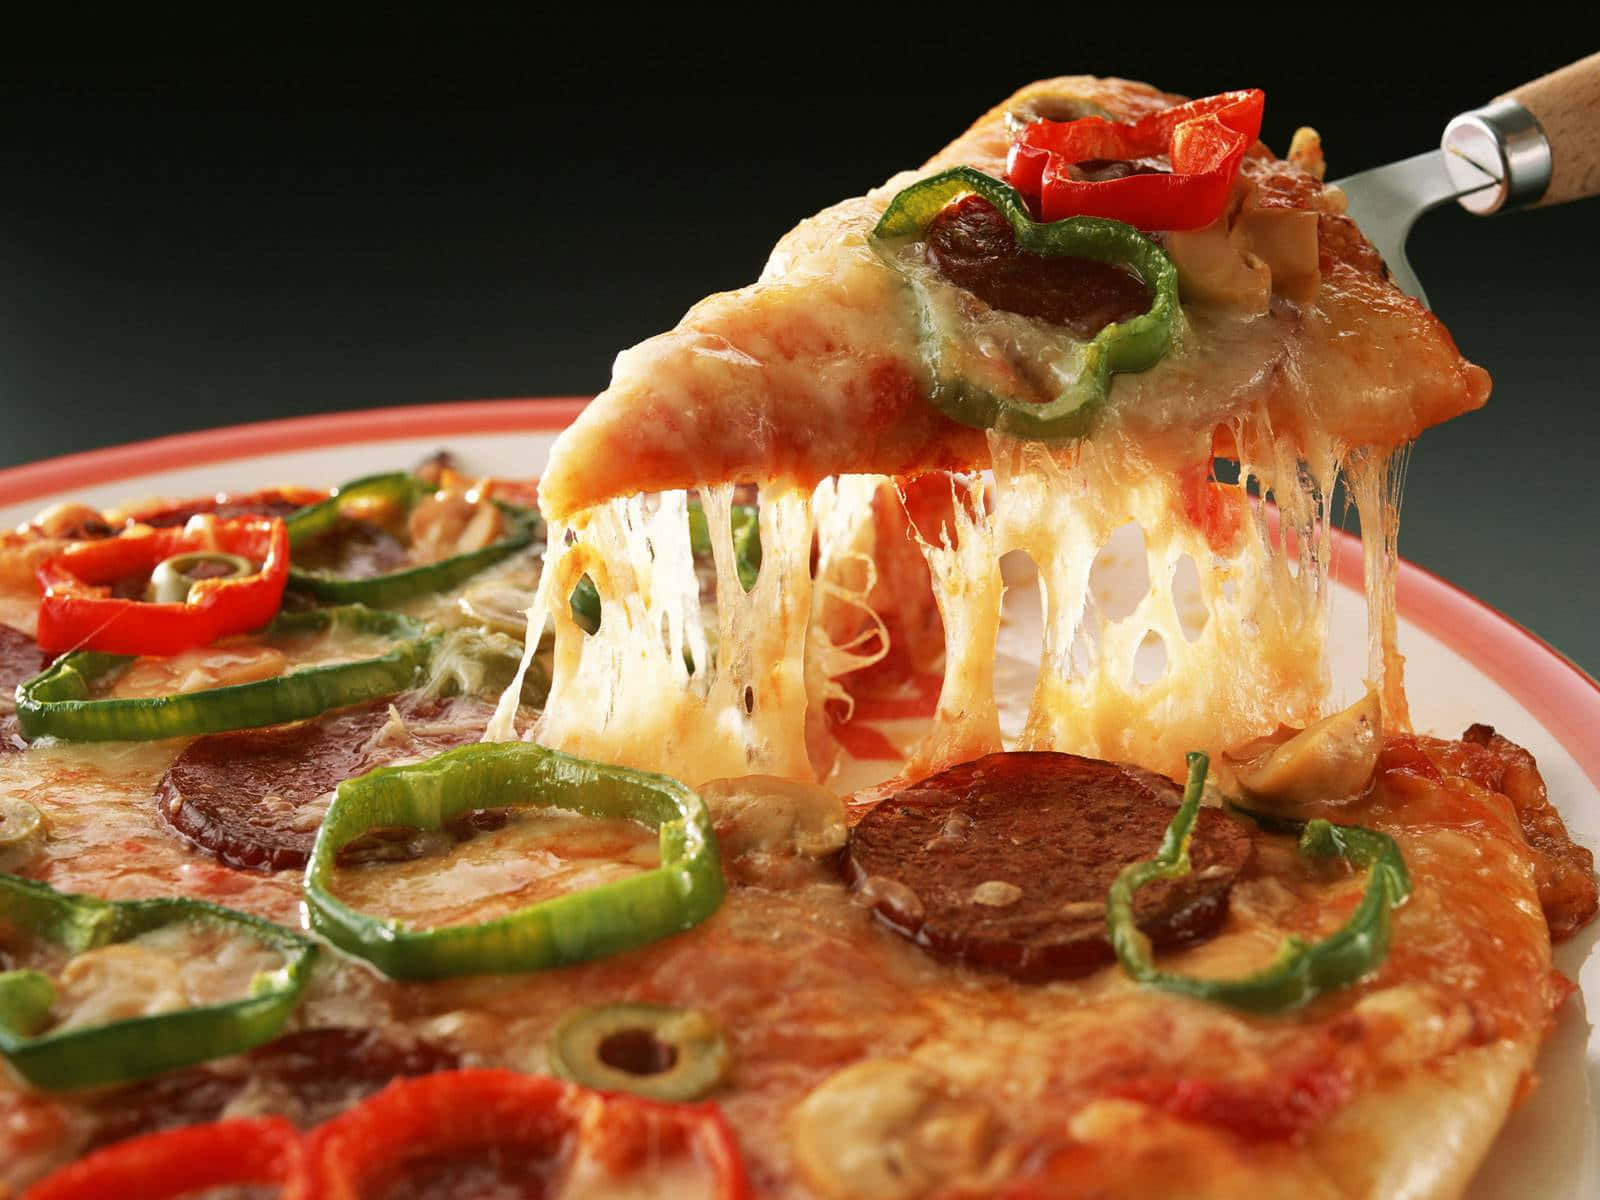 Enjoy a delicious pizza from Pizza Hut